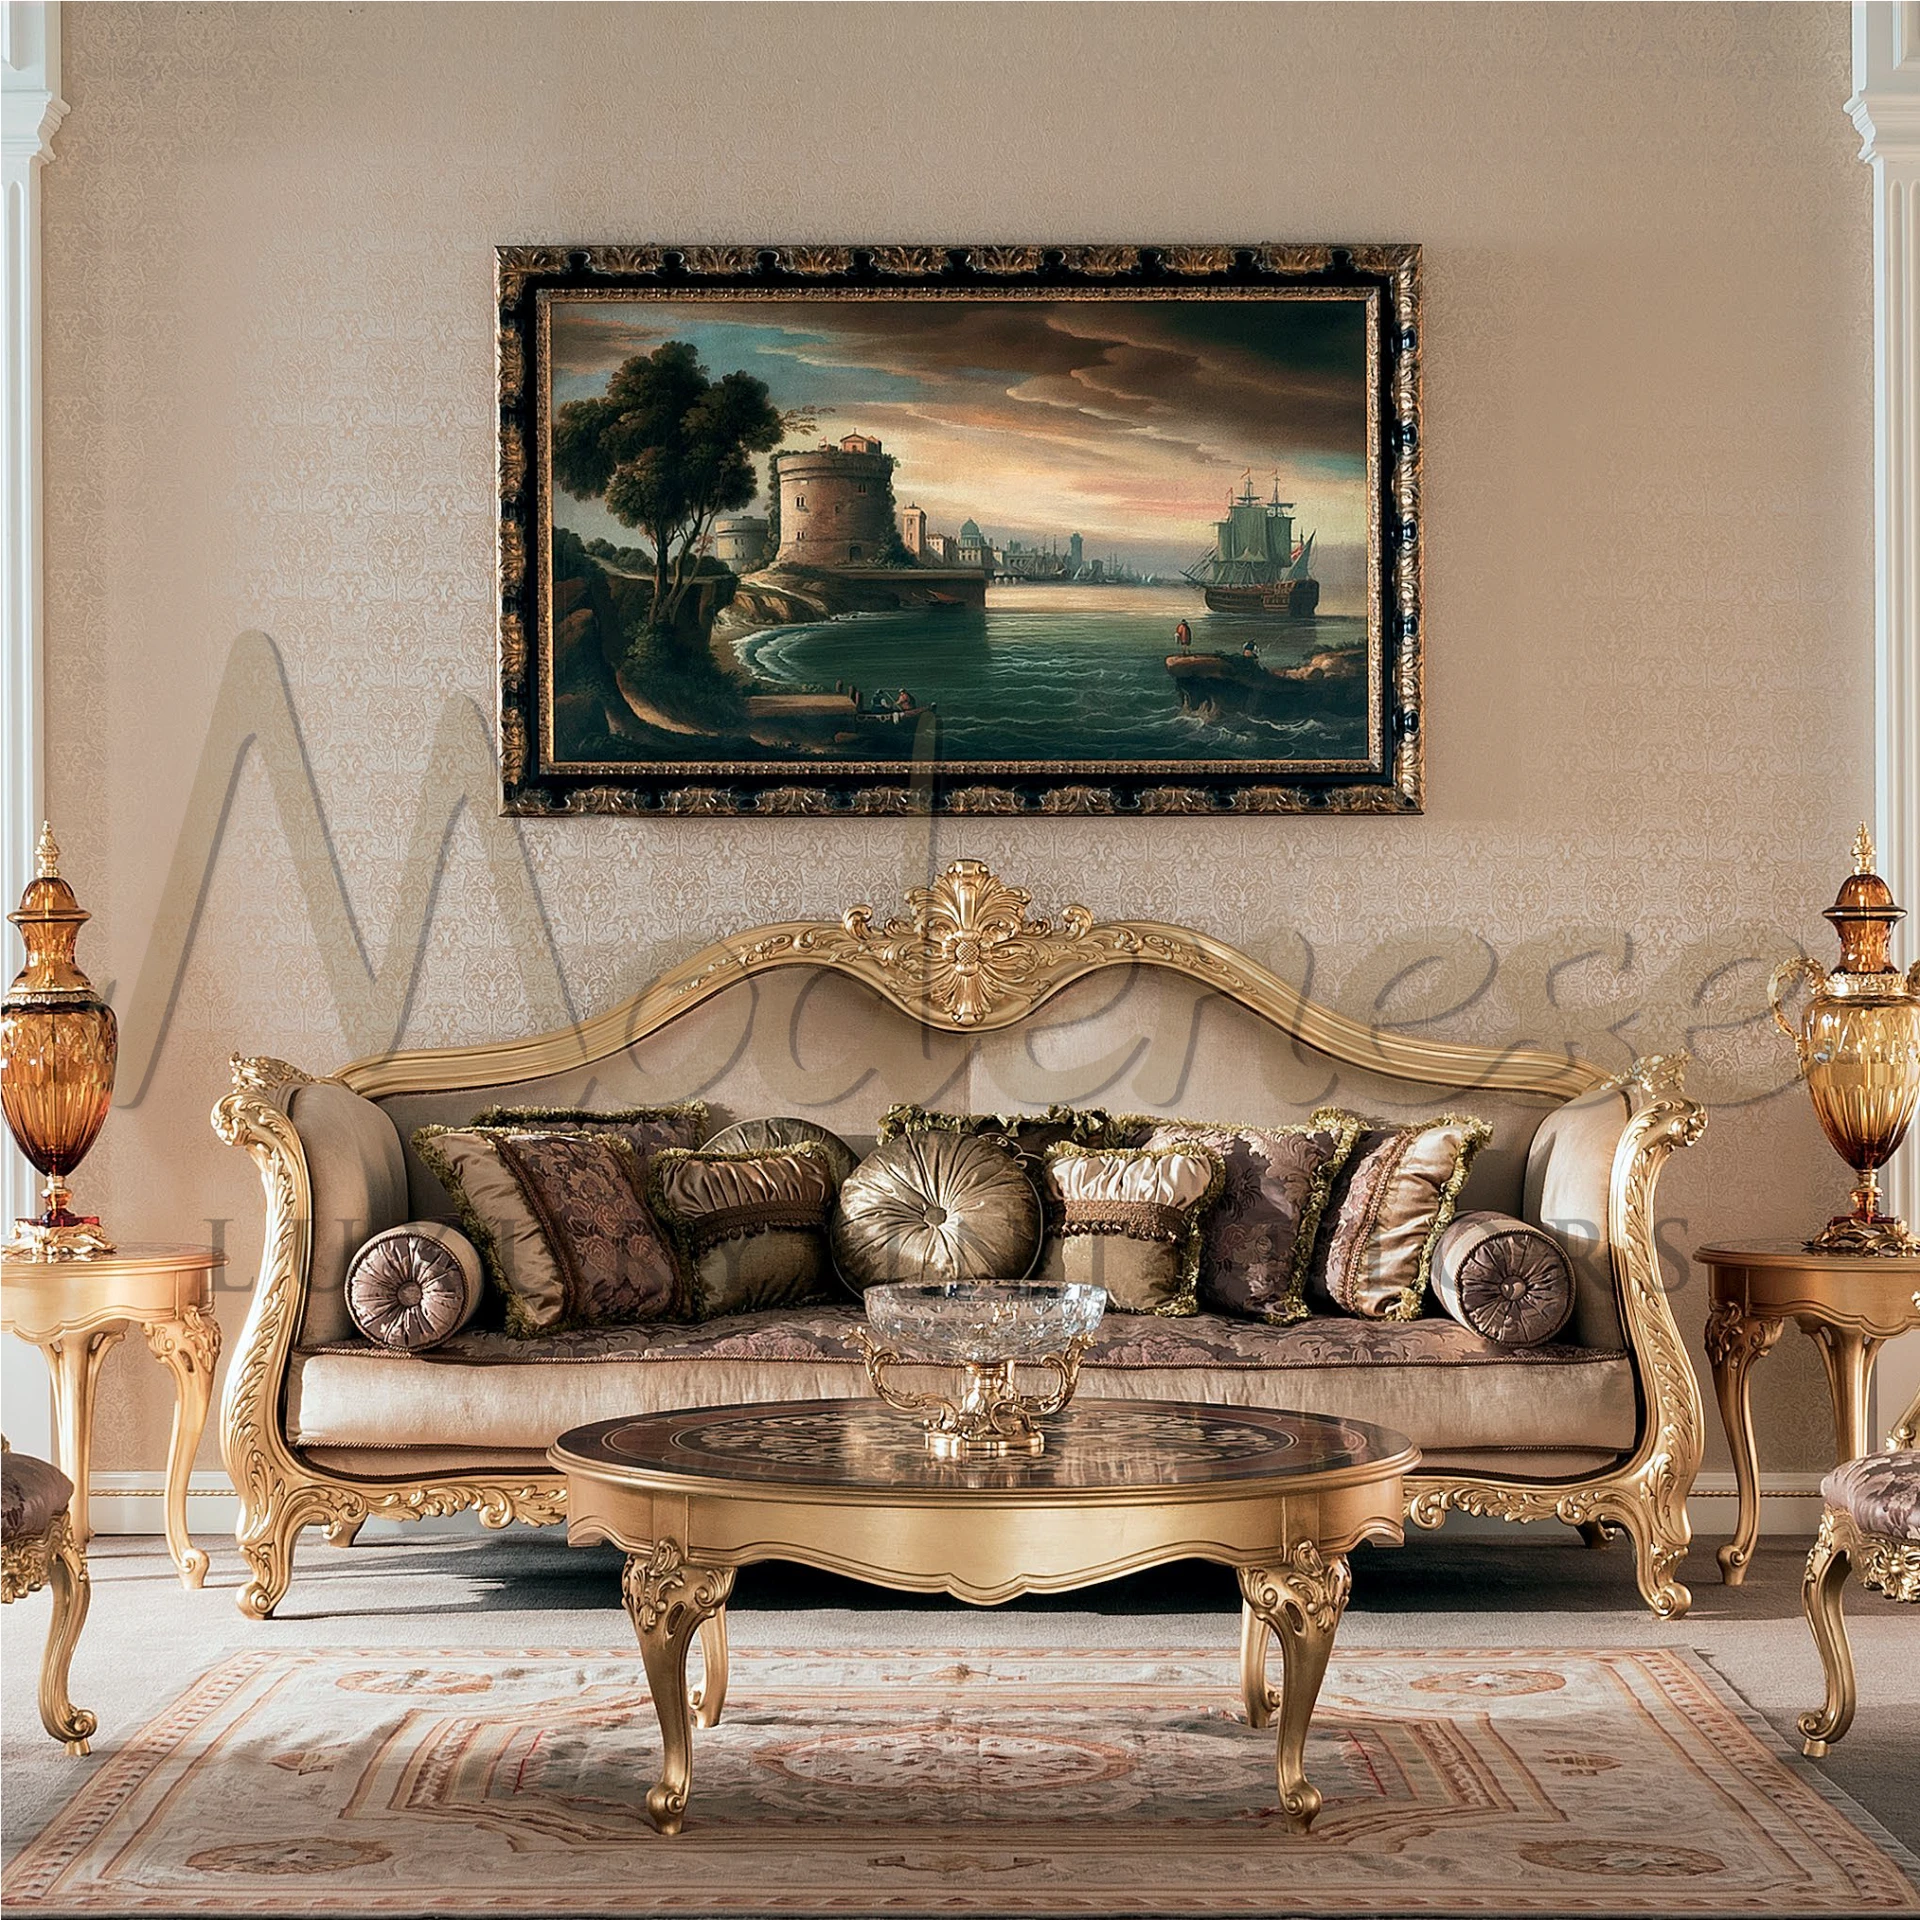 Opulent and sophisticated Baroque Elegant Pillow, showcasing the grandeur of Italian craftsmanship and luxury textiles.